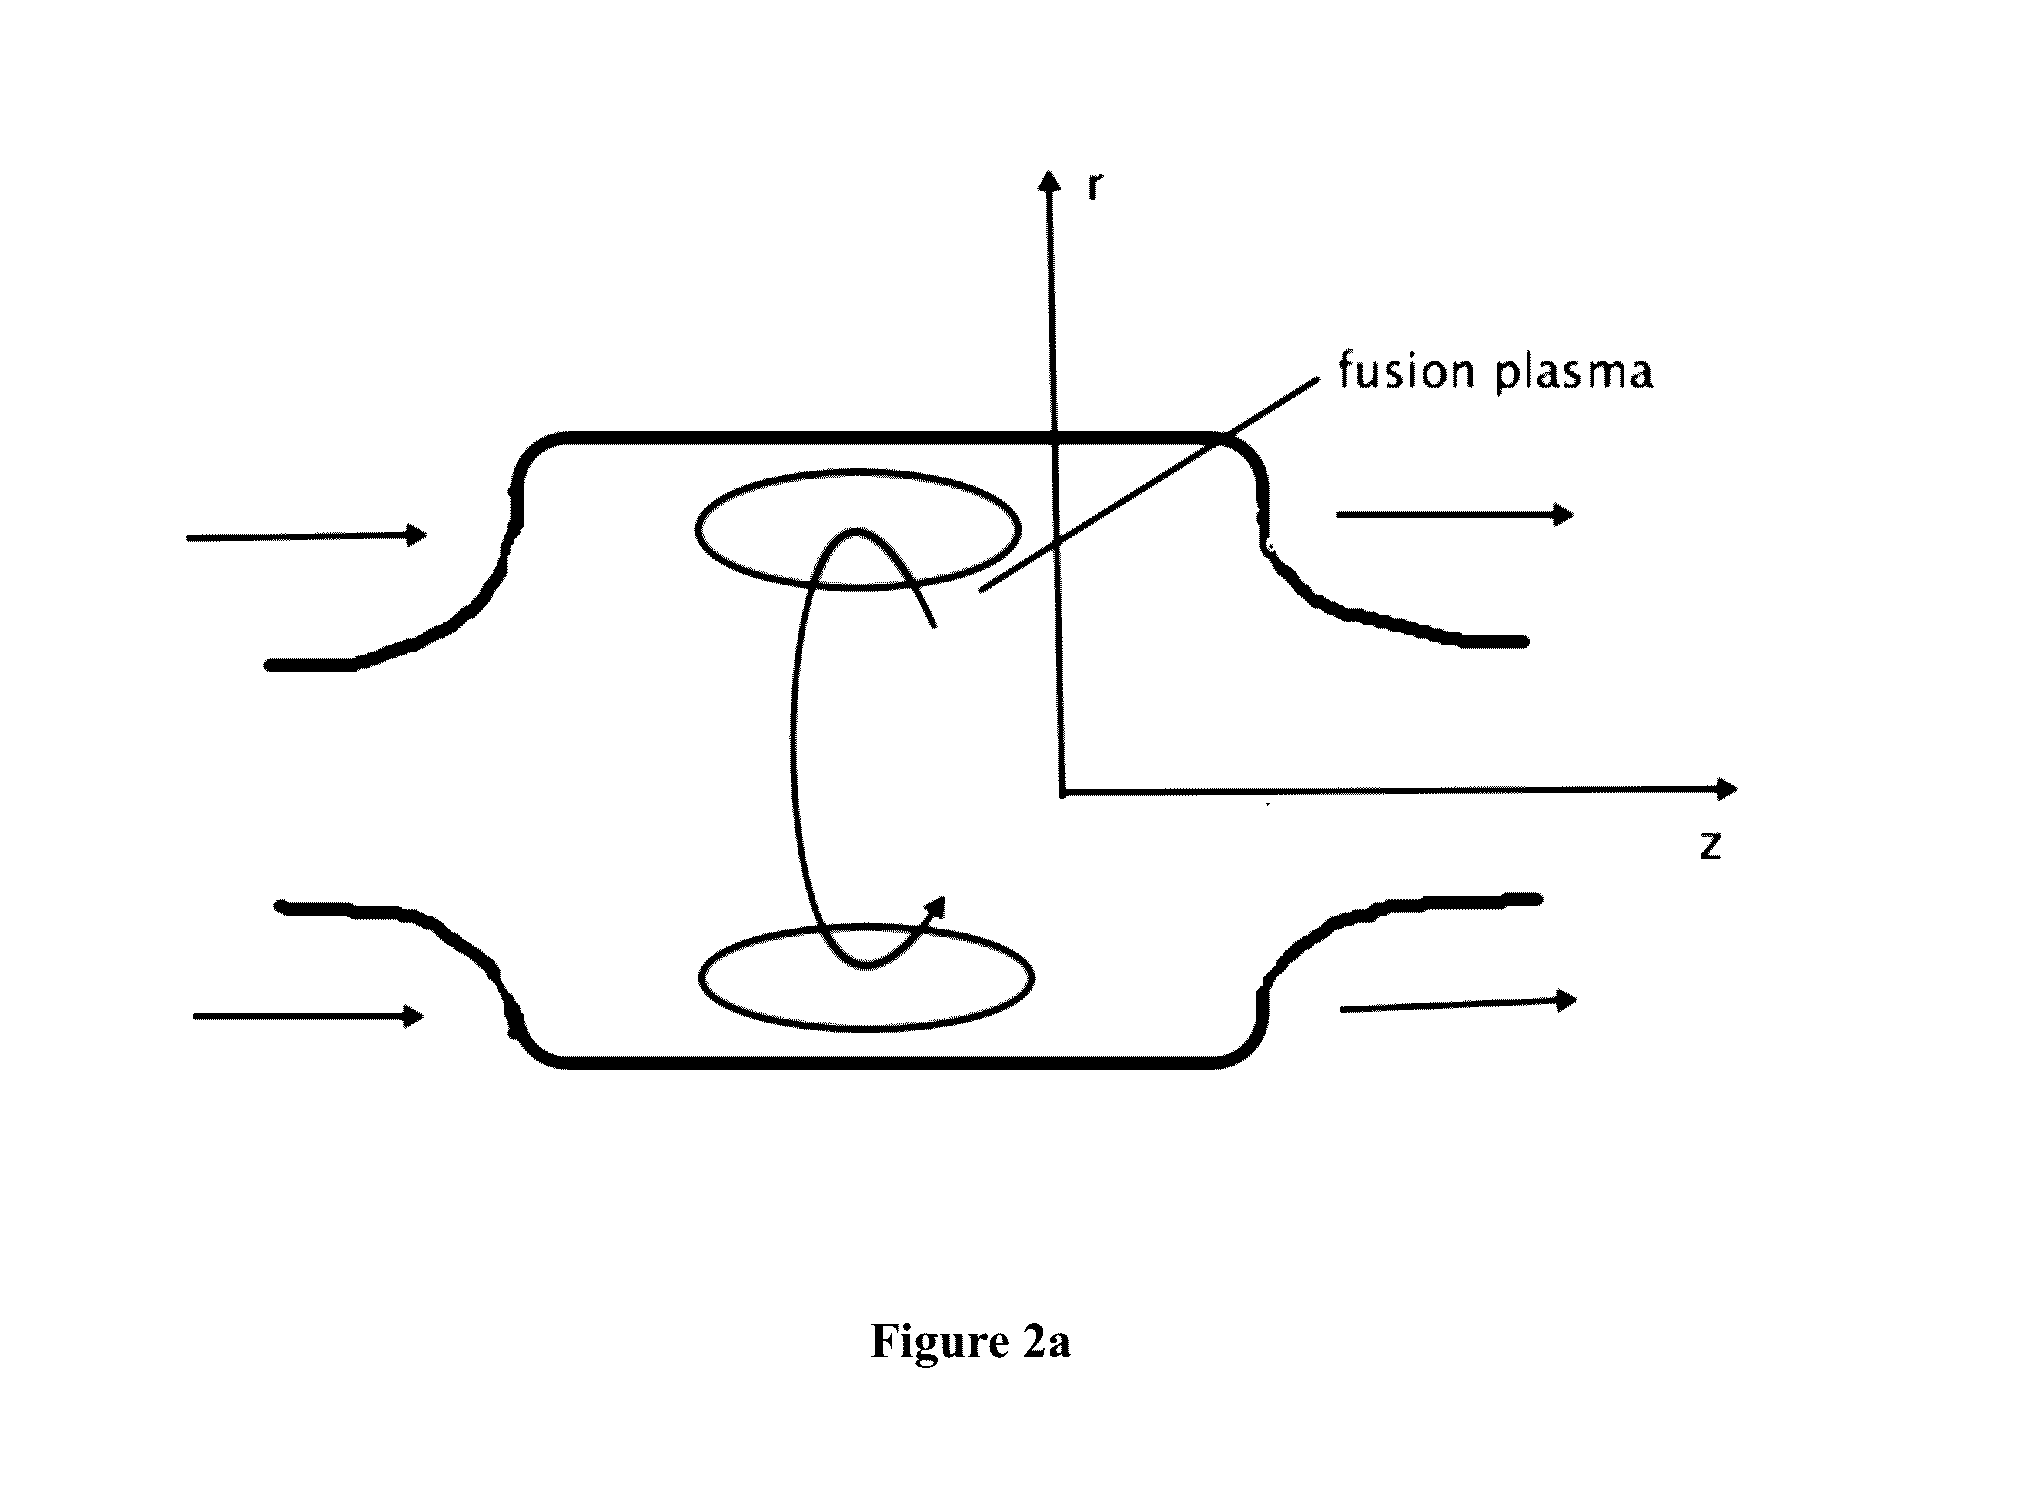 Thermonuclear Dynamo Inside Ultracentrifuge with Supersonic Plasma Flow Stabilization